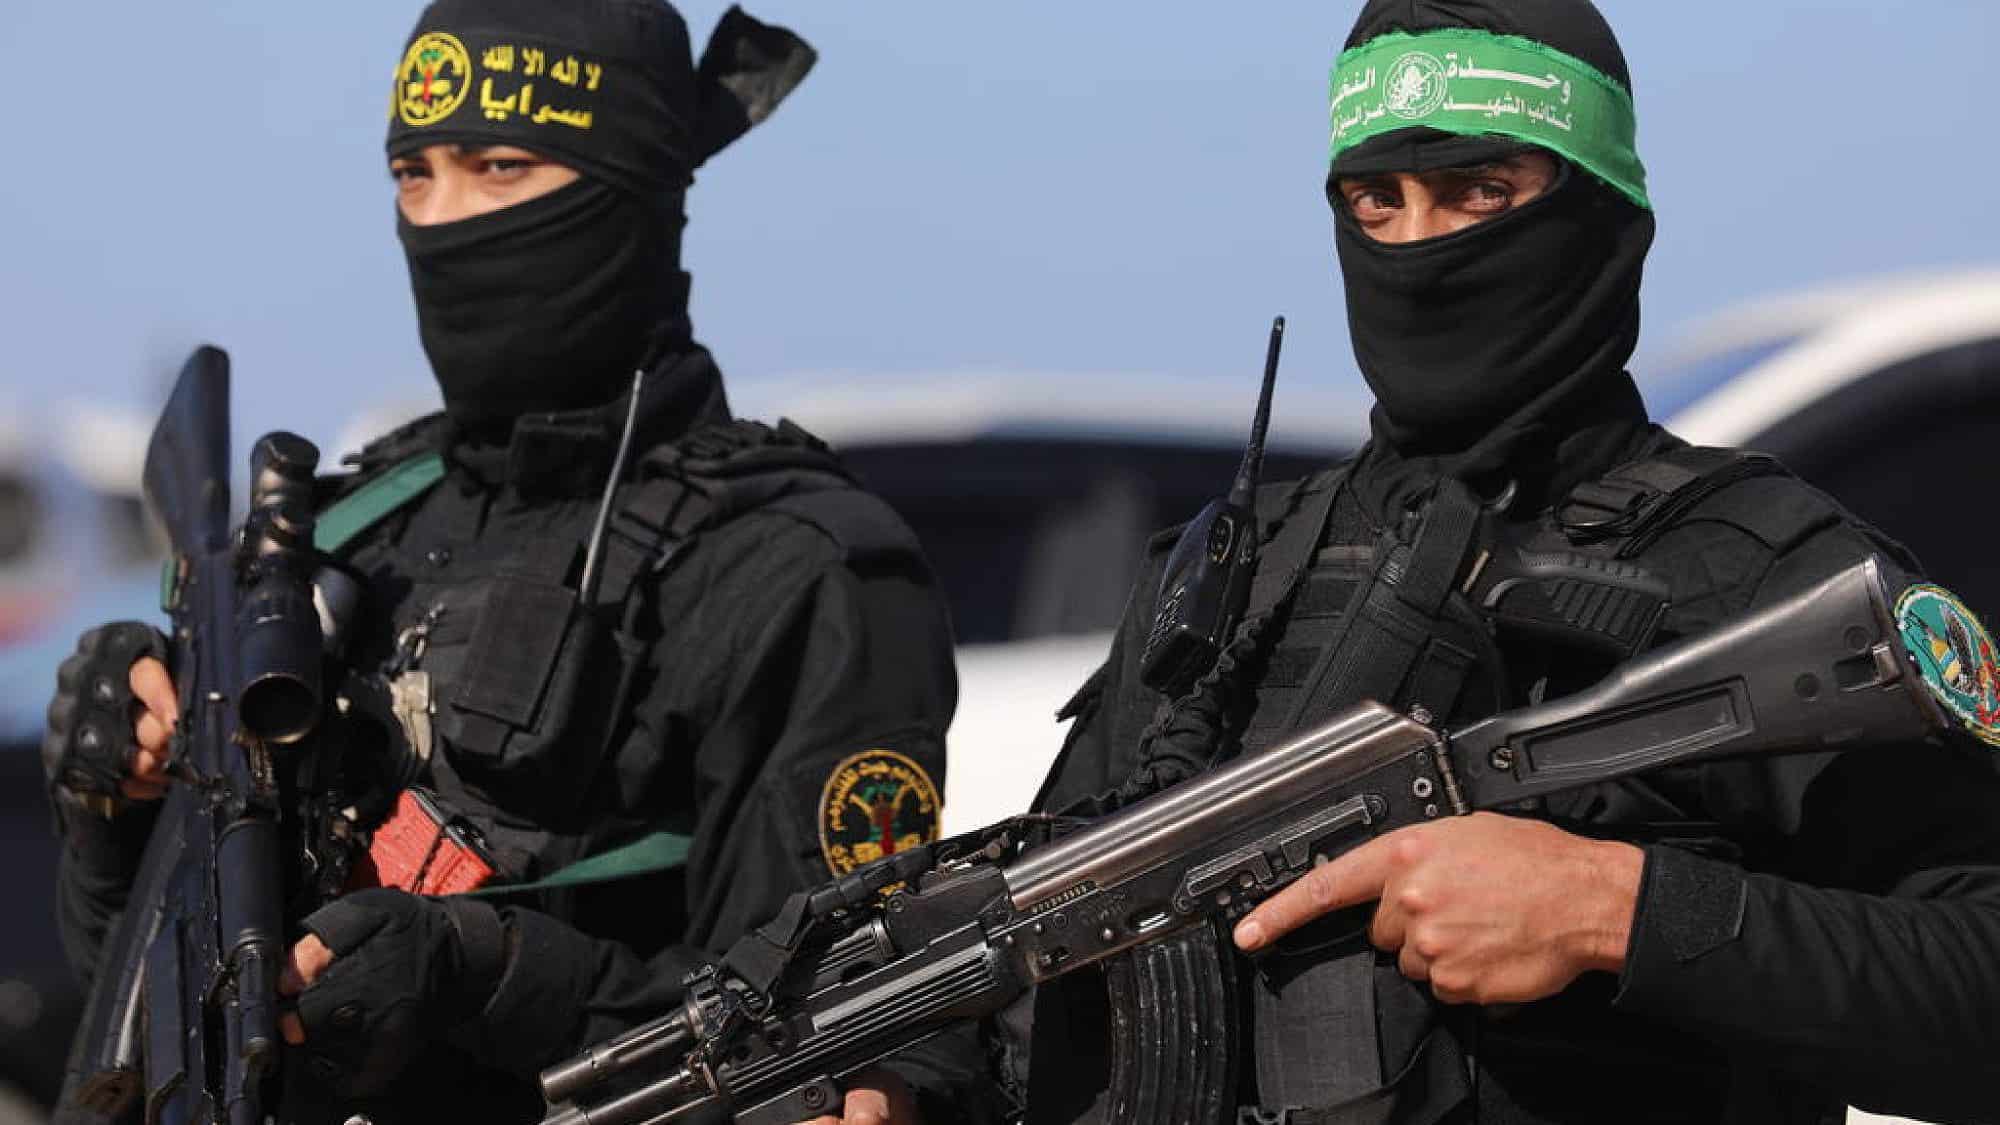 Hamas, Islamic Jihad and 11 other terrorist groups take part in the Strong Foundation "military" drill in the Gaza Strip, Dec 29, 2020. Photo by Majdi Fathi/TPS.